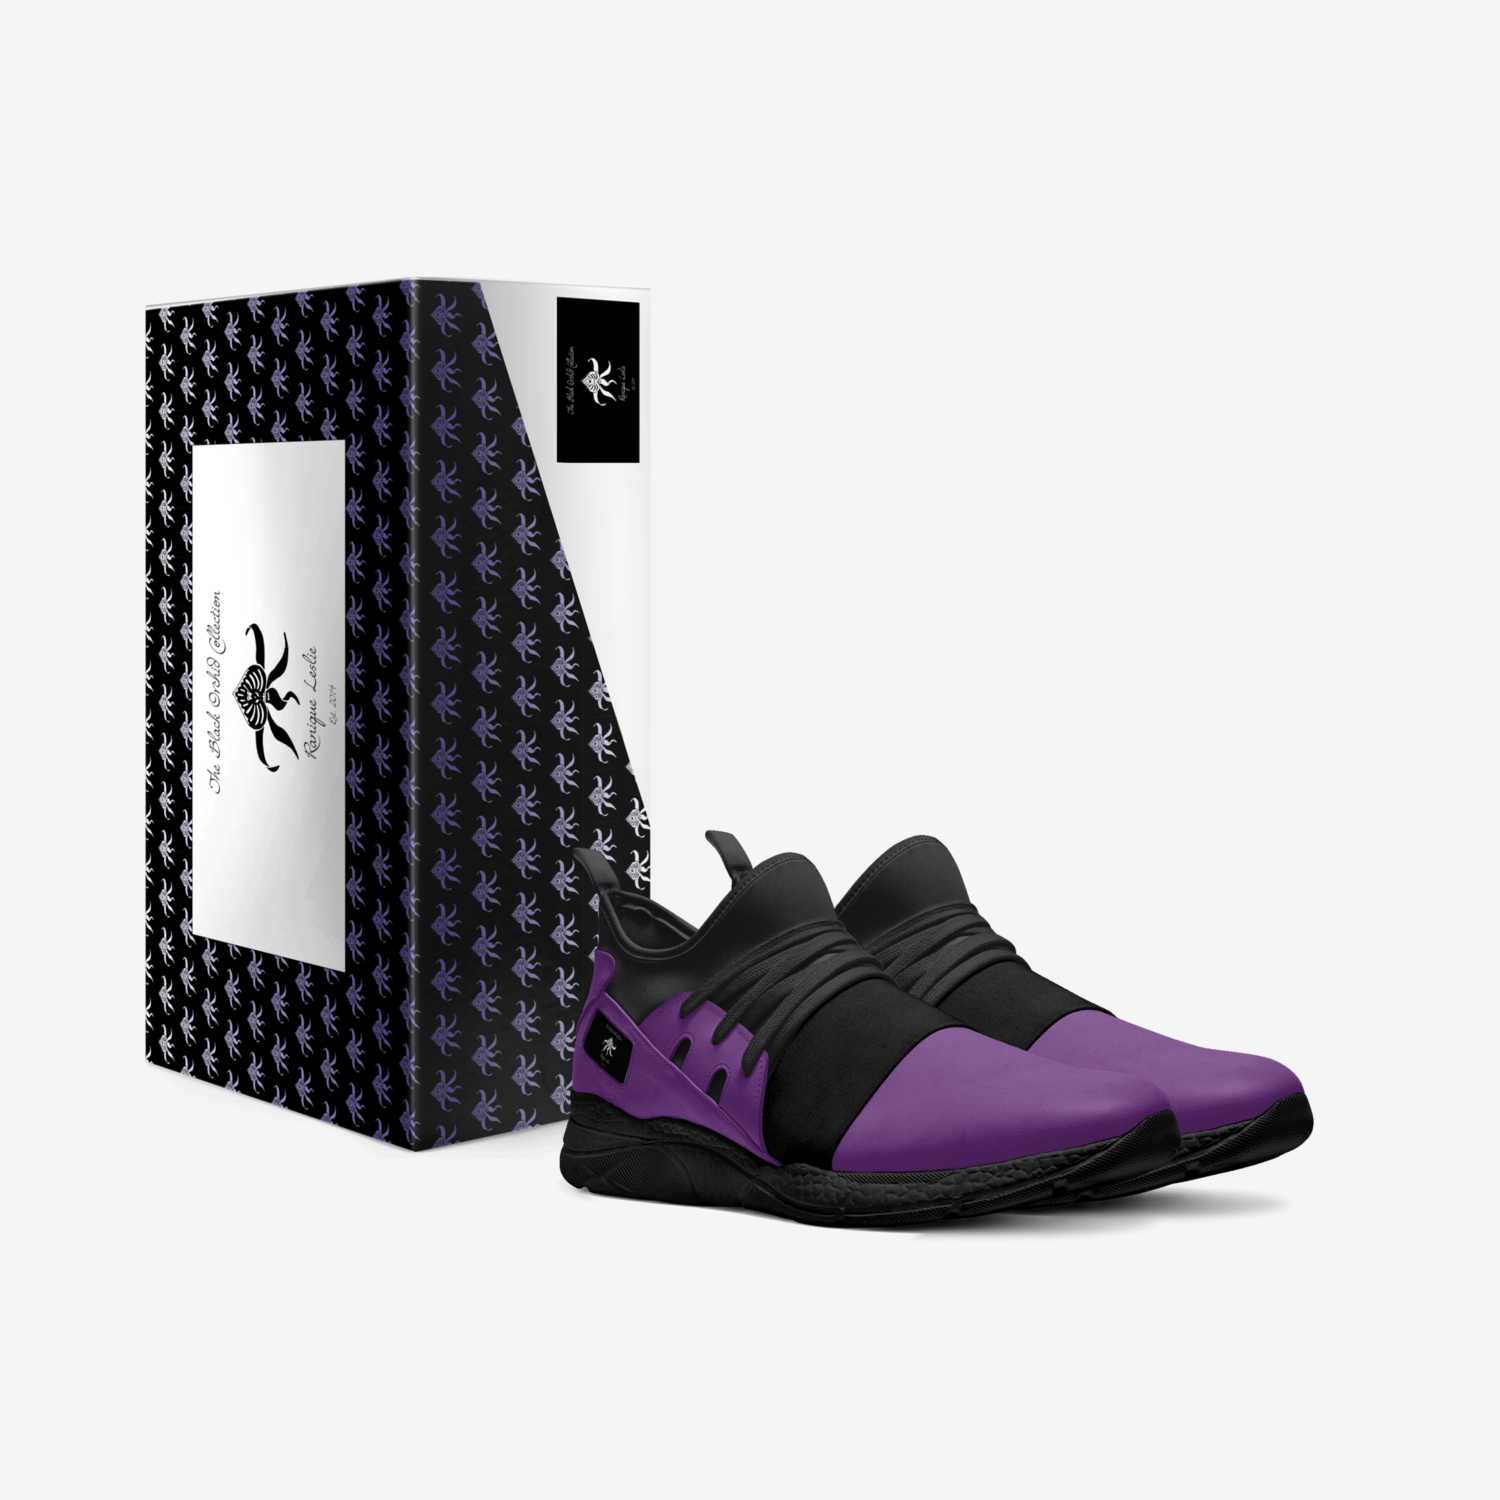 Black Orchid custom made in Italy shoes by Ranique Leslie | Box view